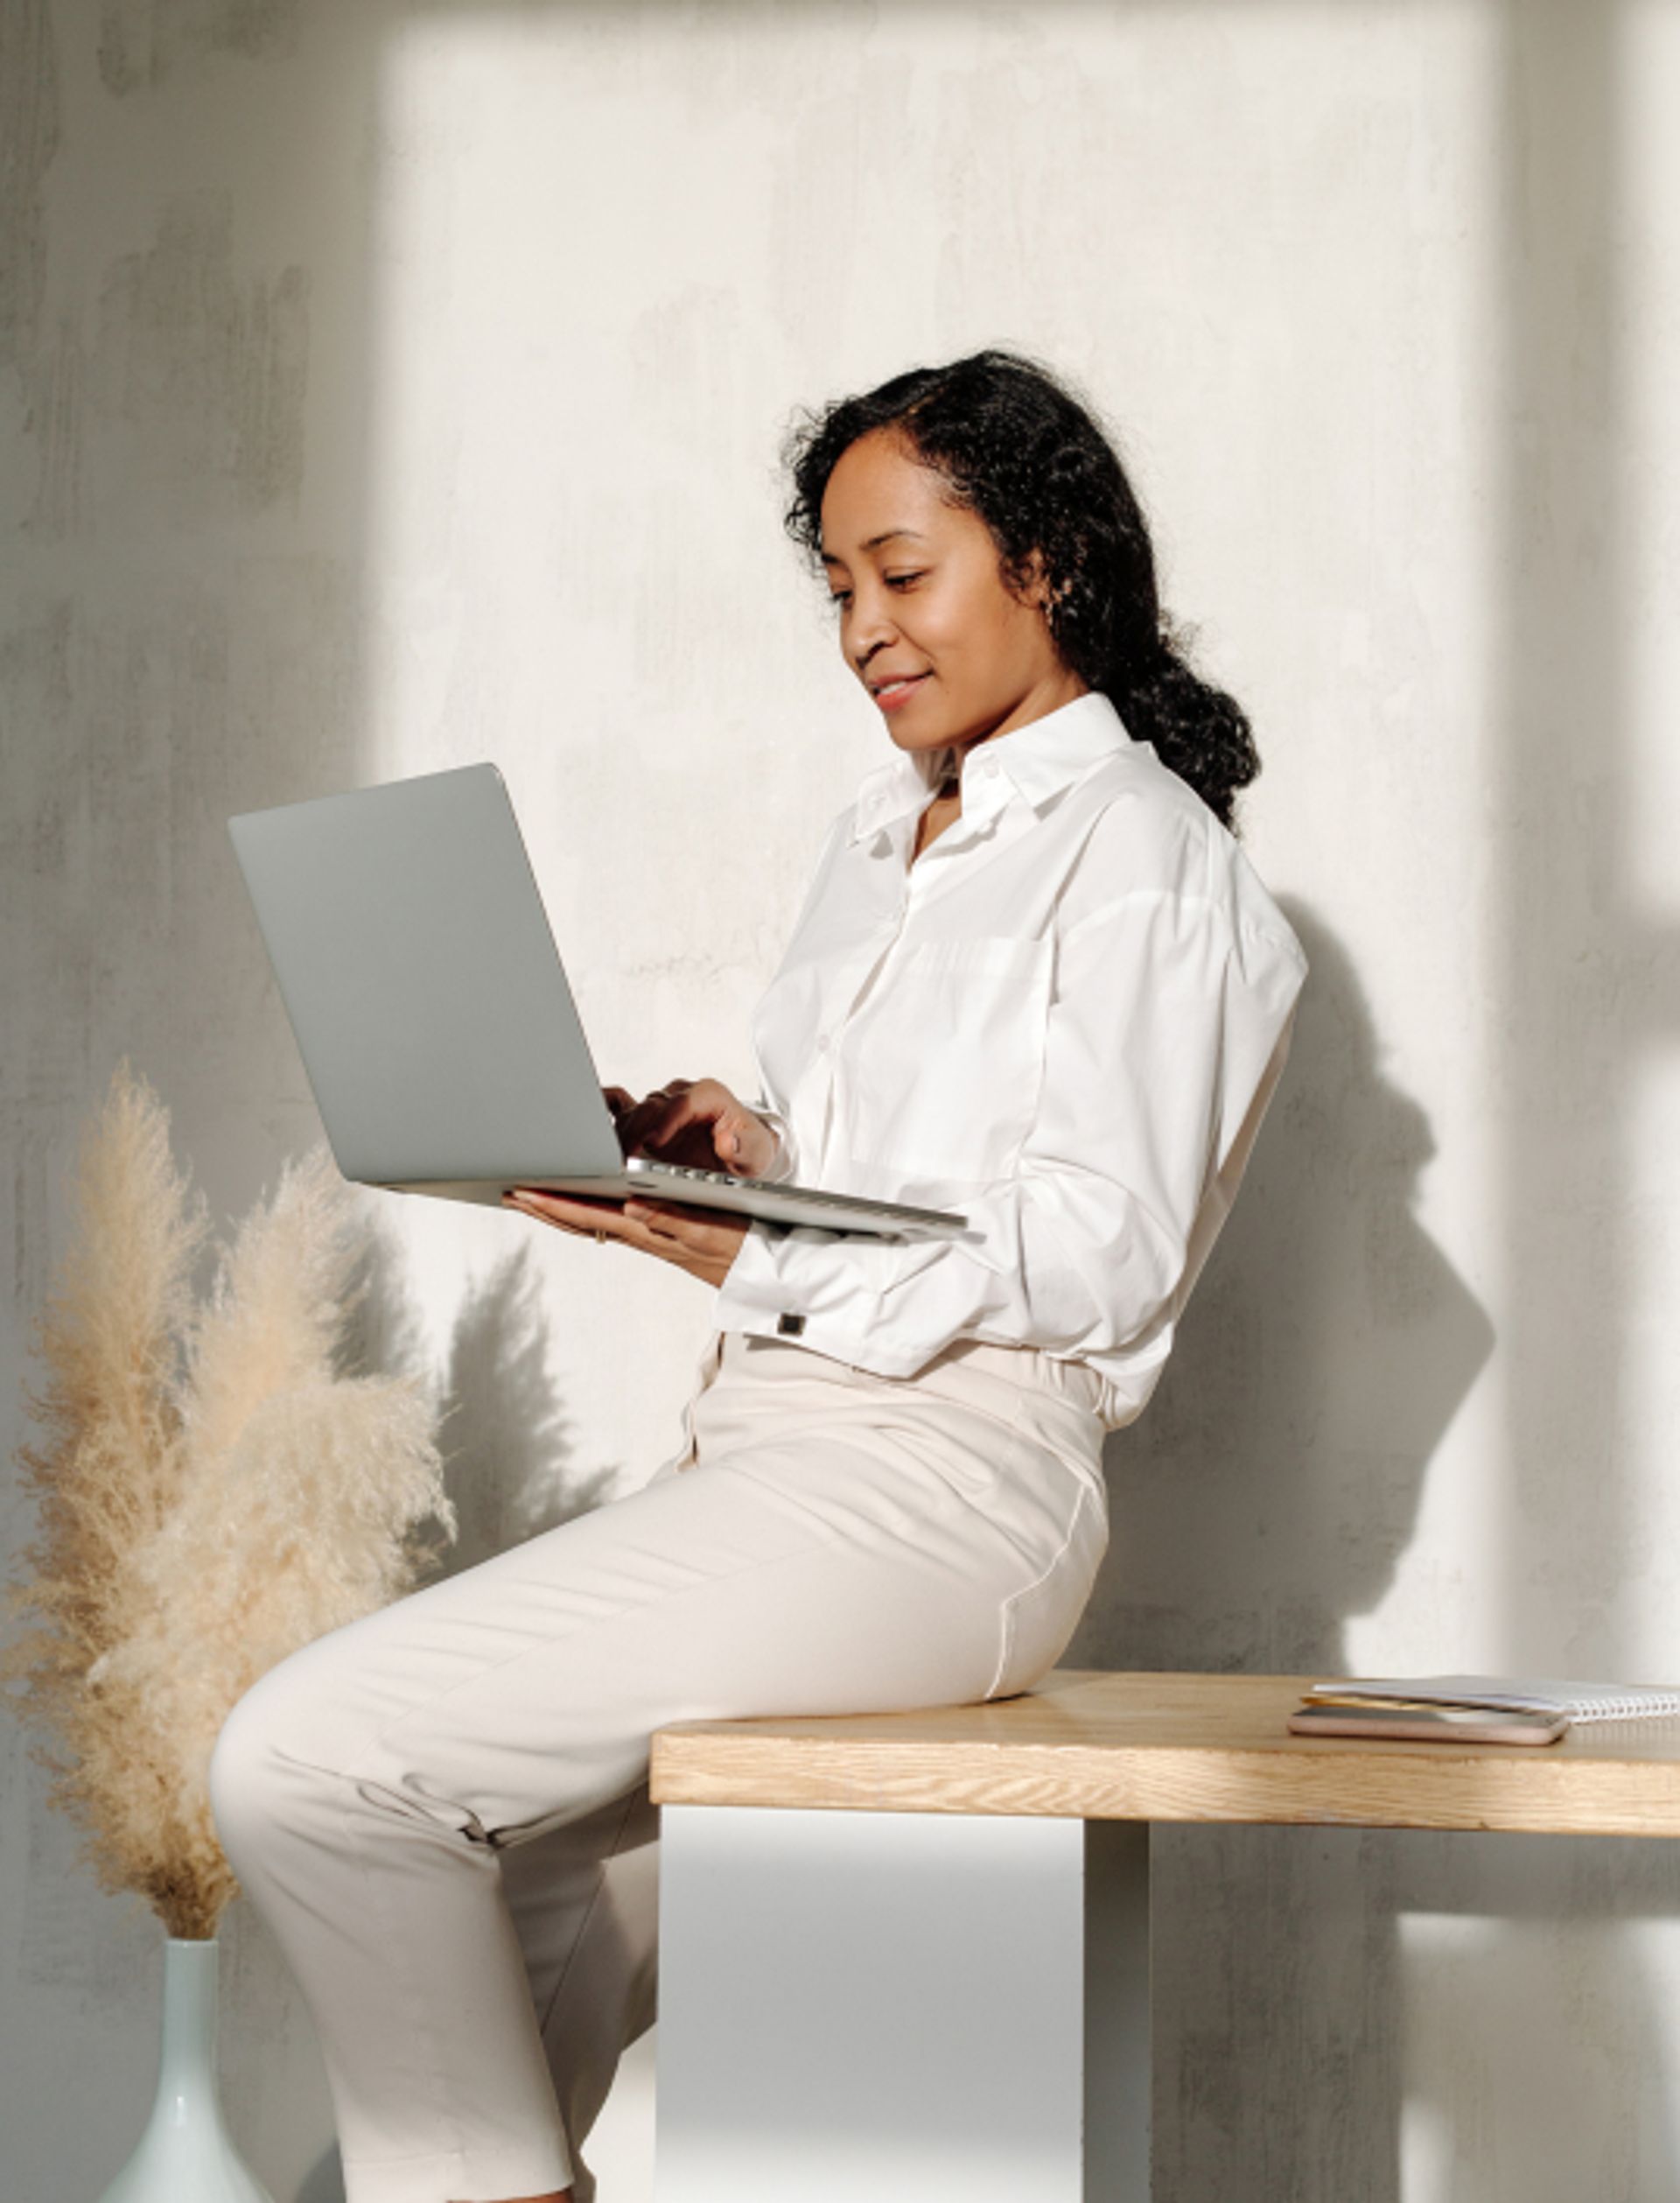 Woman holding laptop and smiling as she works. 